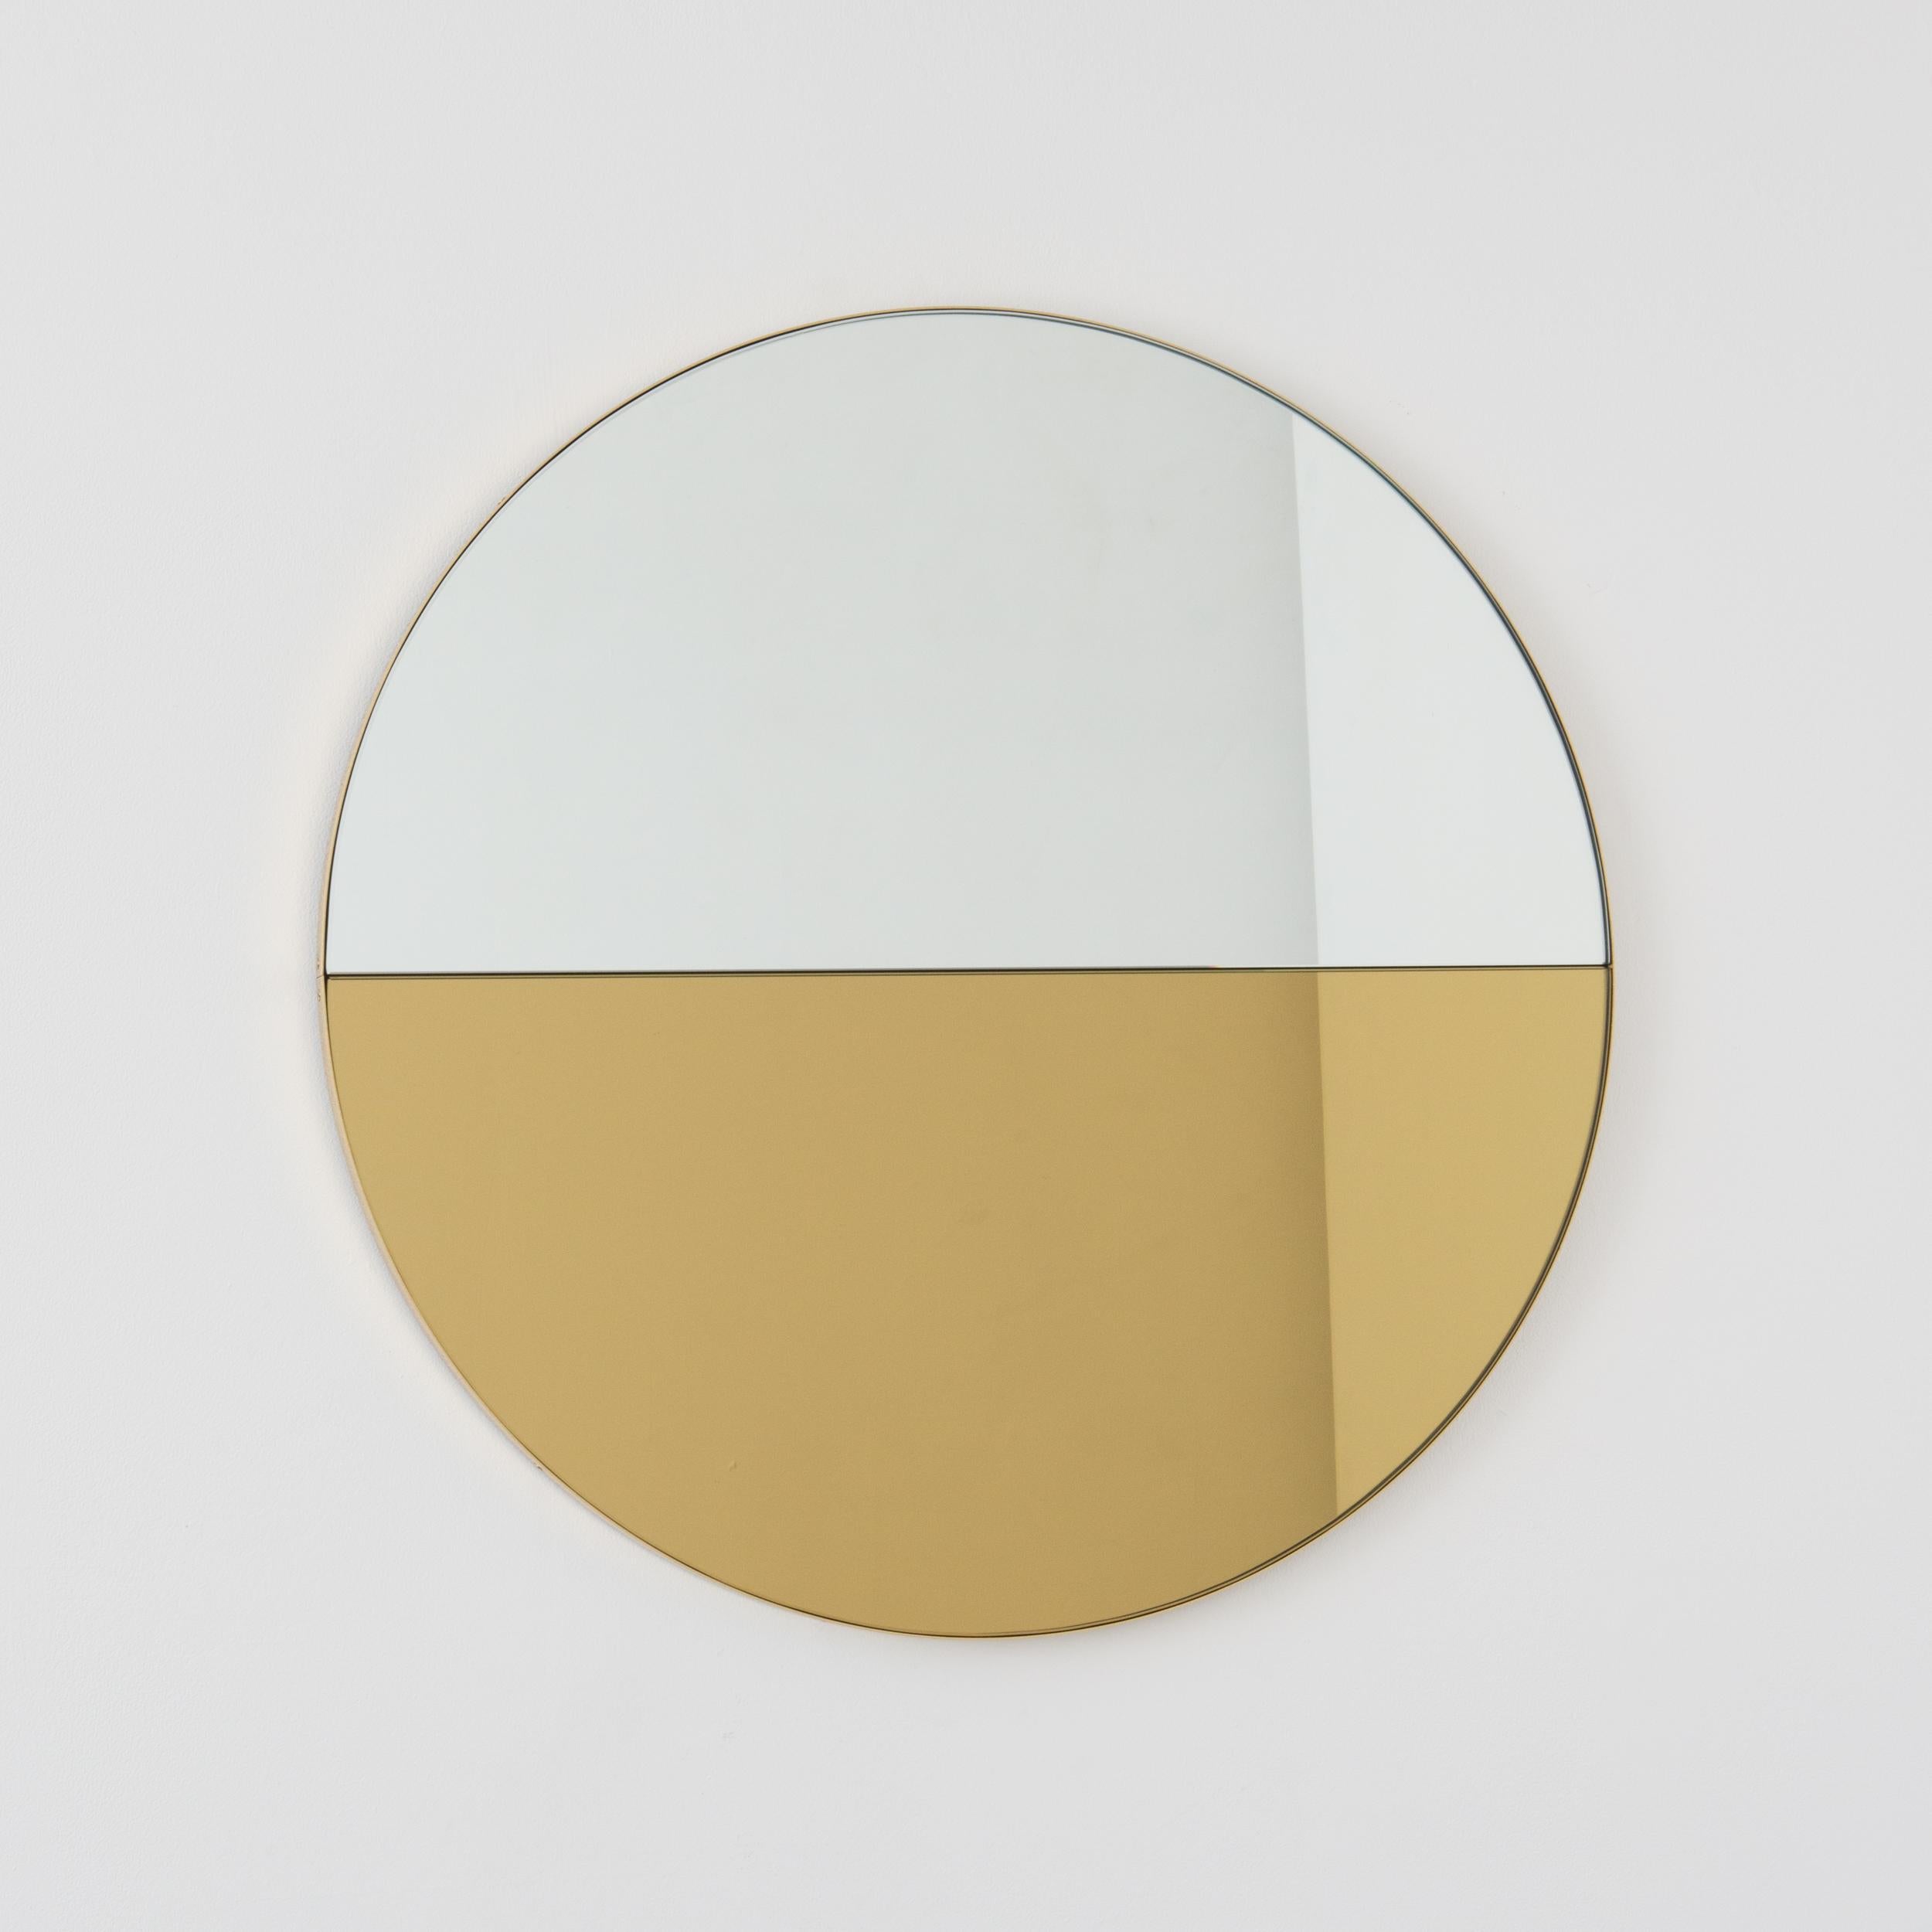 Orbis Dualis Mixed Gold and Silver Tinted Round Mirror with Brass Frame, Regular For Sale 1